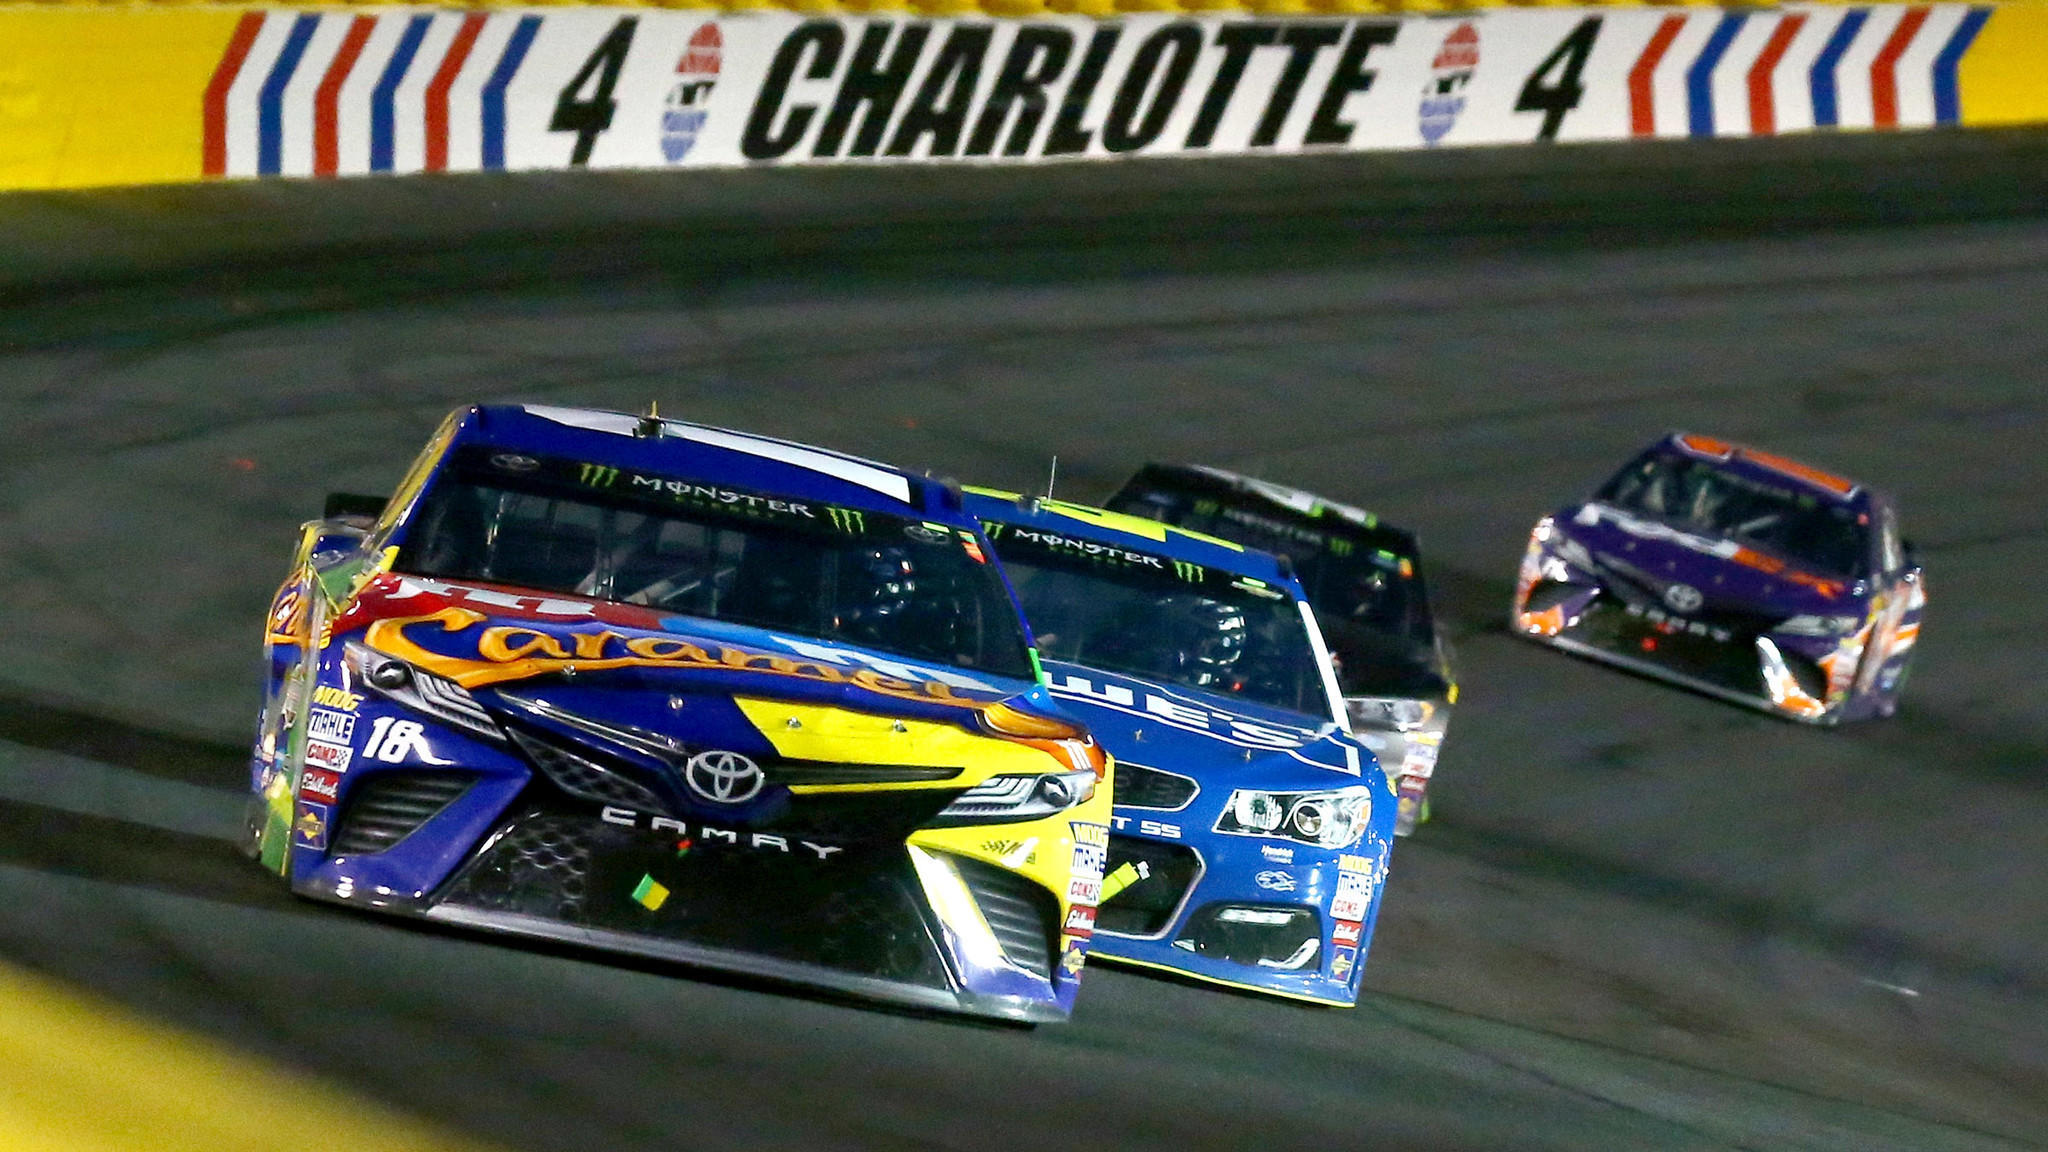 2048x1152 Kyle Busch wins NASCAR's All-Star race at Charlotte for the first time - LA  Times